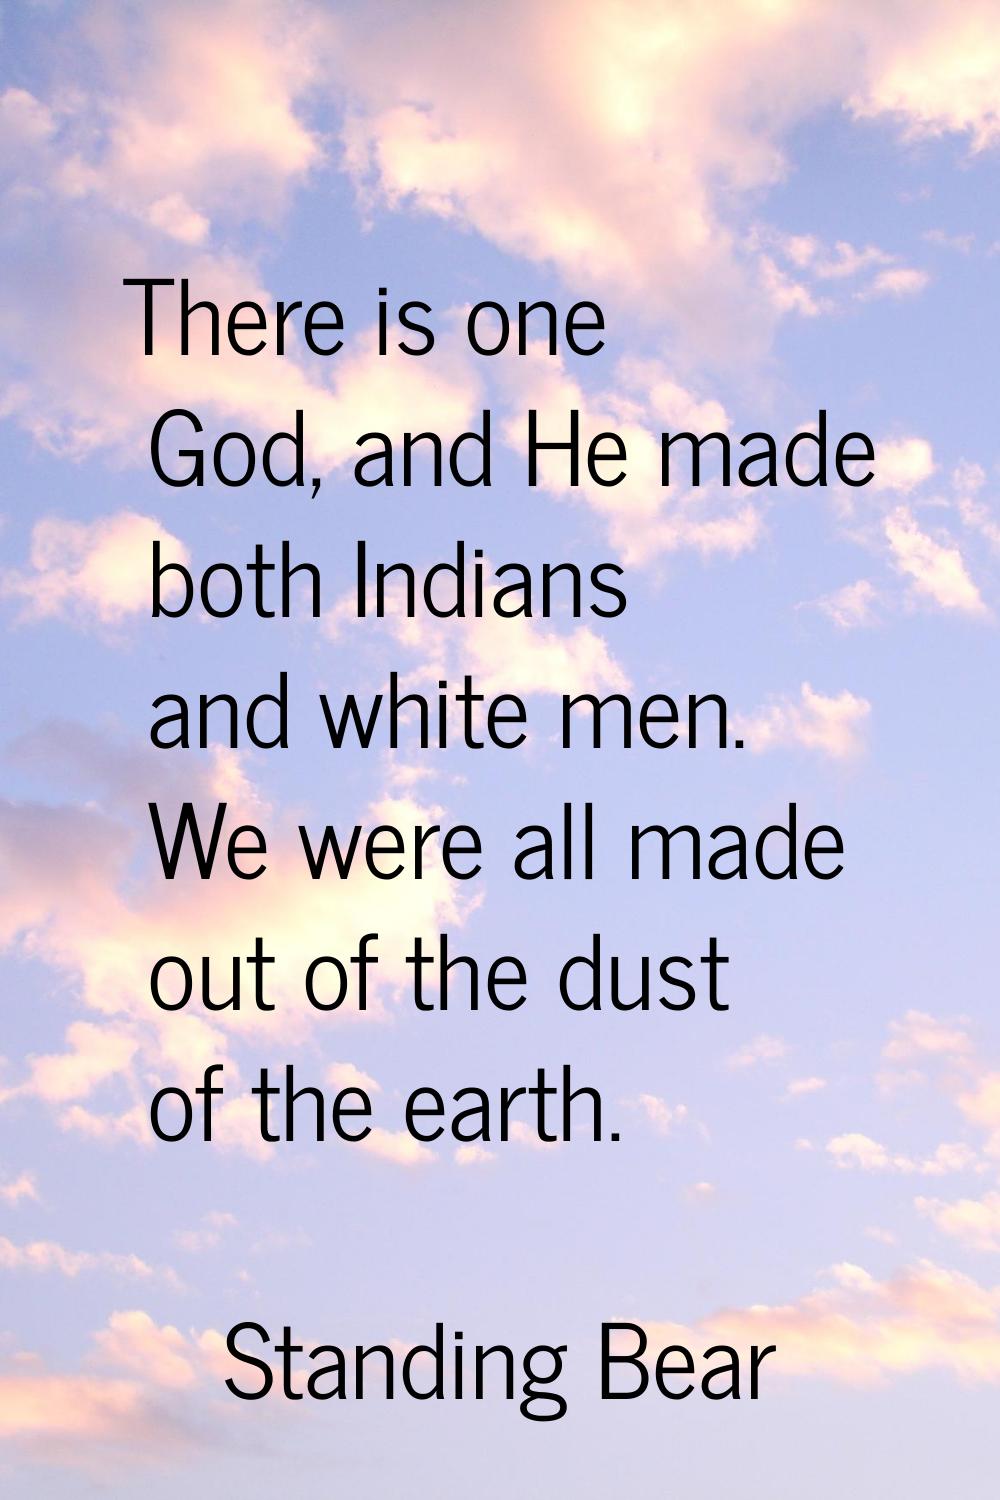 There is one God, and He made both Indians and white men. We were all made out of the dust of the e